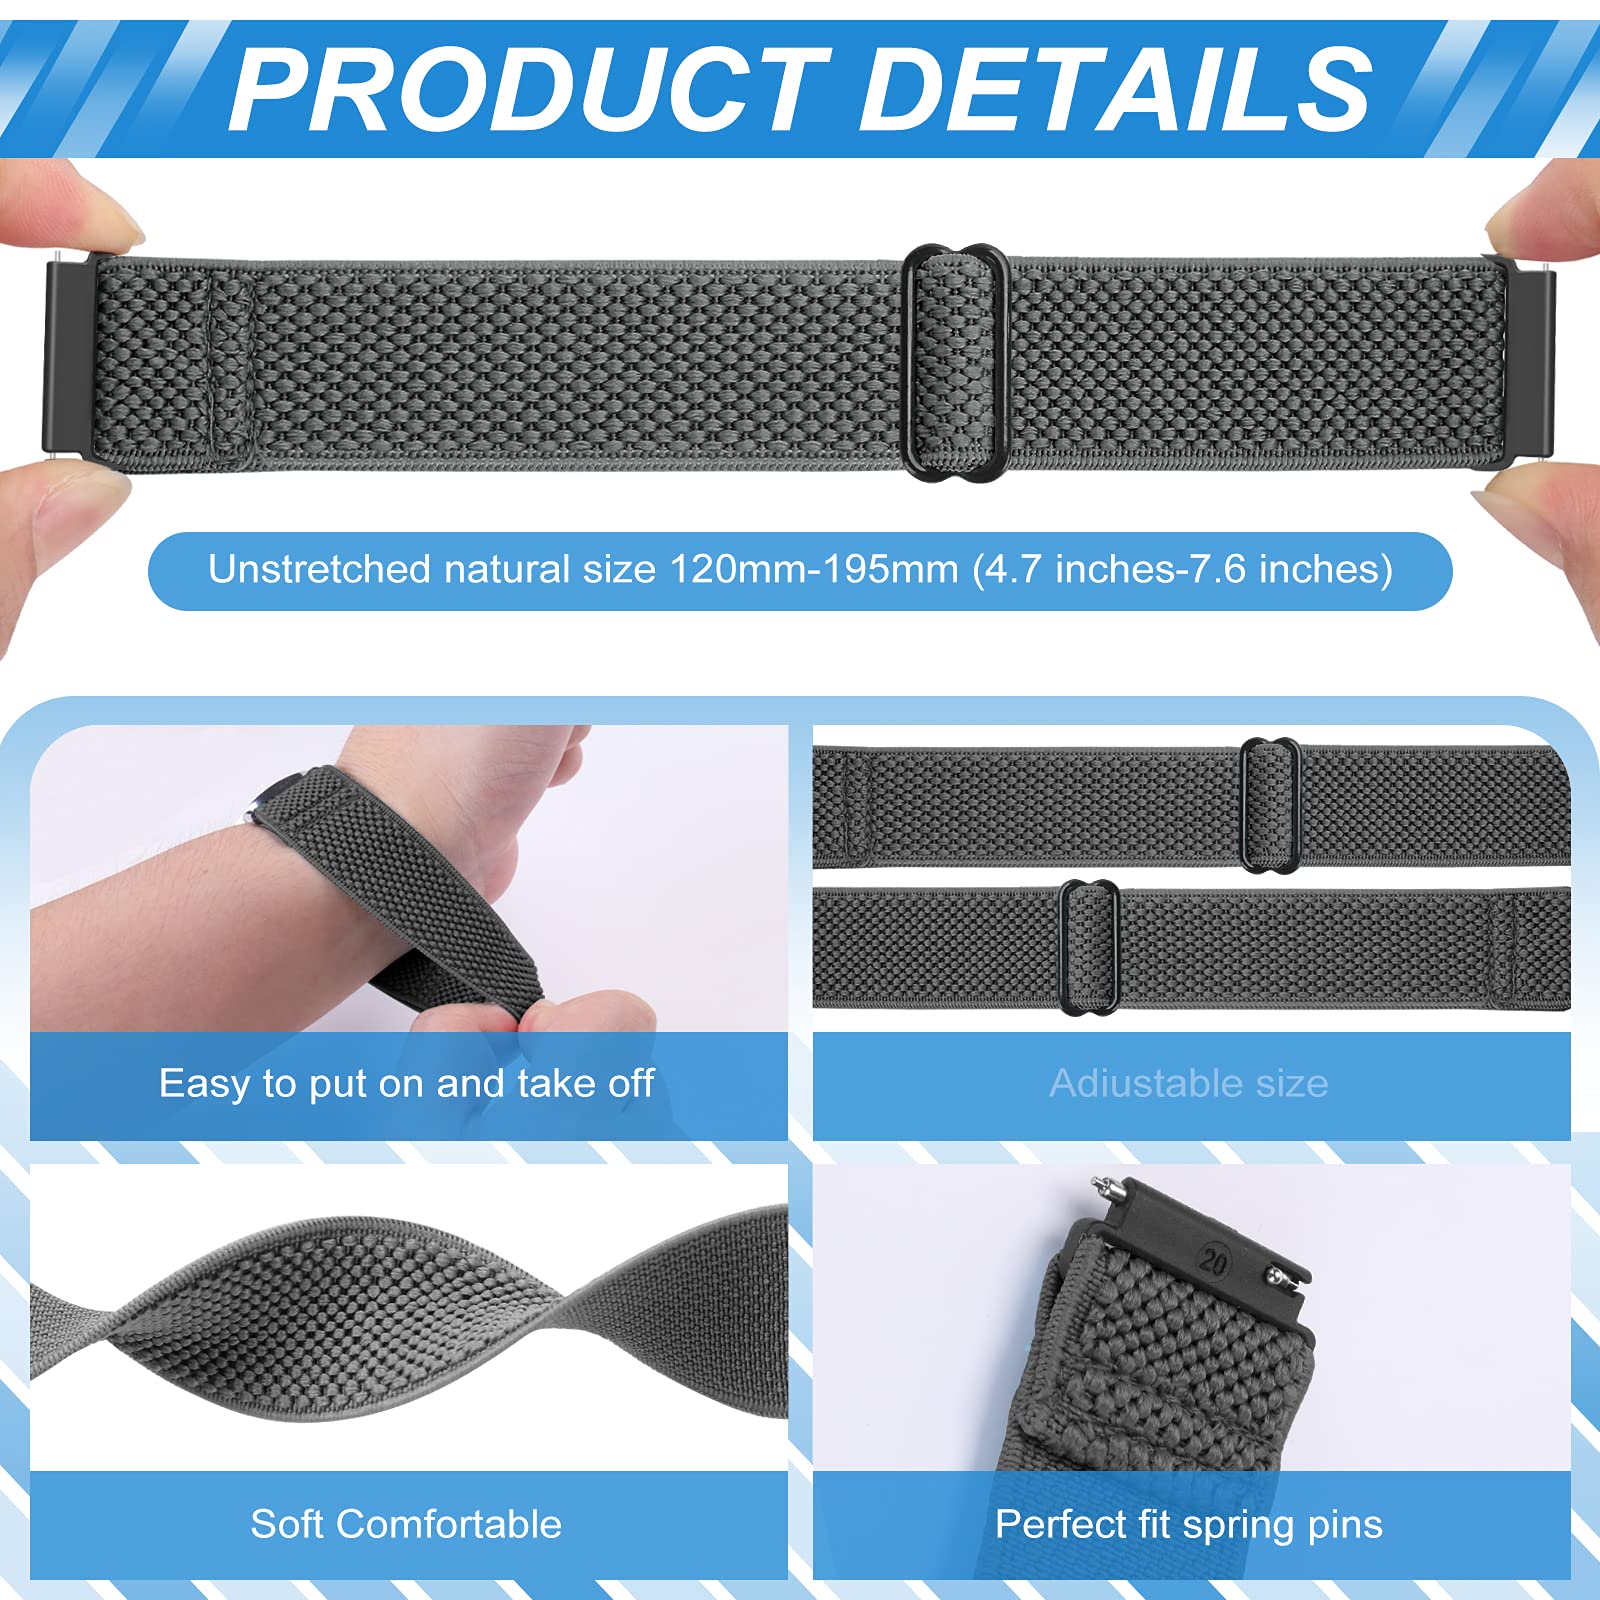 Relting Compatible with 16mm 18mm 19mm 20mm 22mm Watch Bands Quick Release Replacement Wristband,Adjustable Stretchy Nylon Solo Loop Straps Fabric Braided Sport Elastic Bands for Men Women